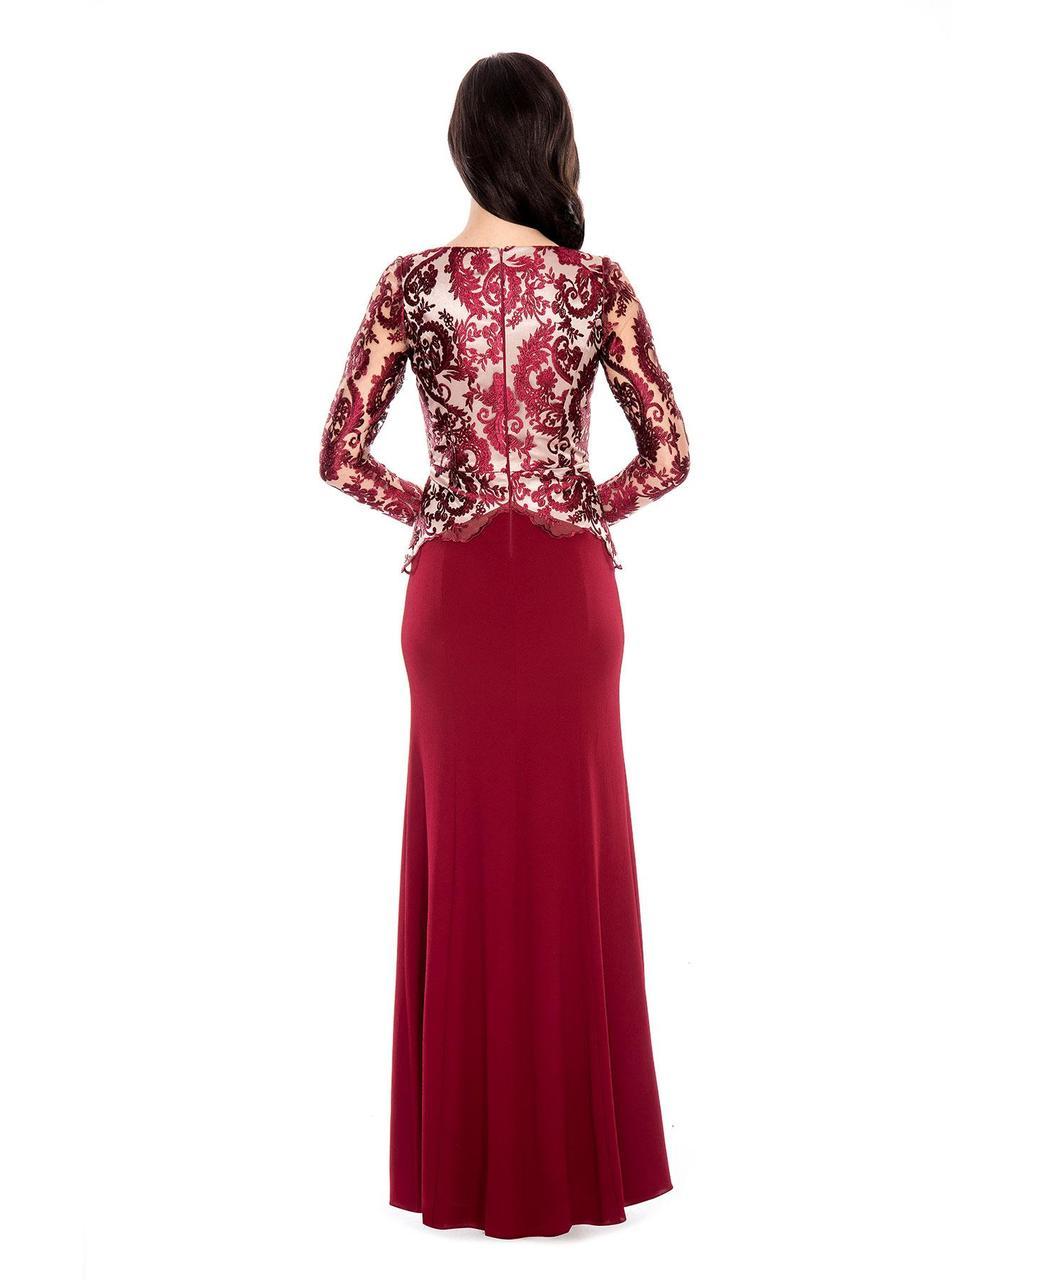 Decode 1.8 - Embroided V Neck Long Sleeves Long Dress 183794 in Red and Nude